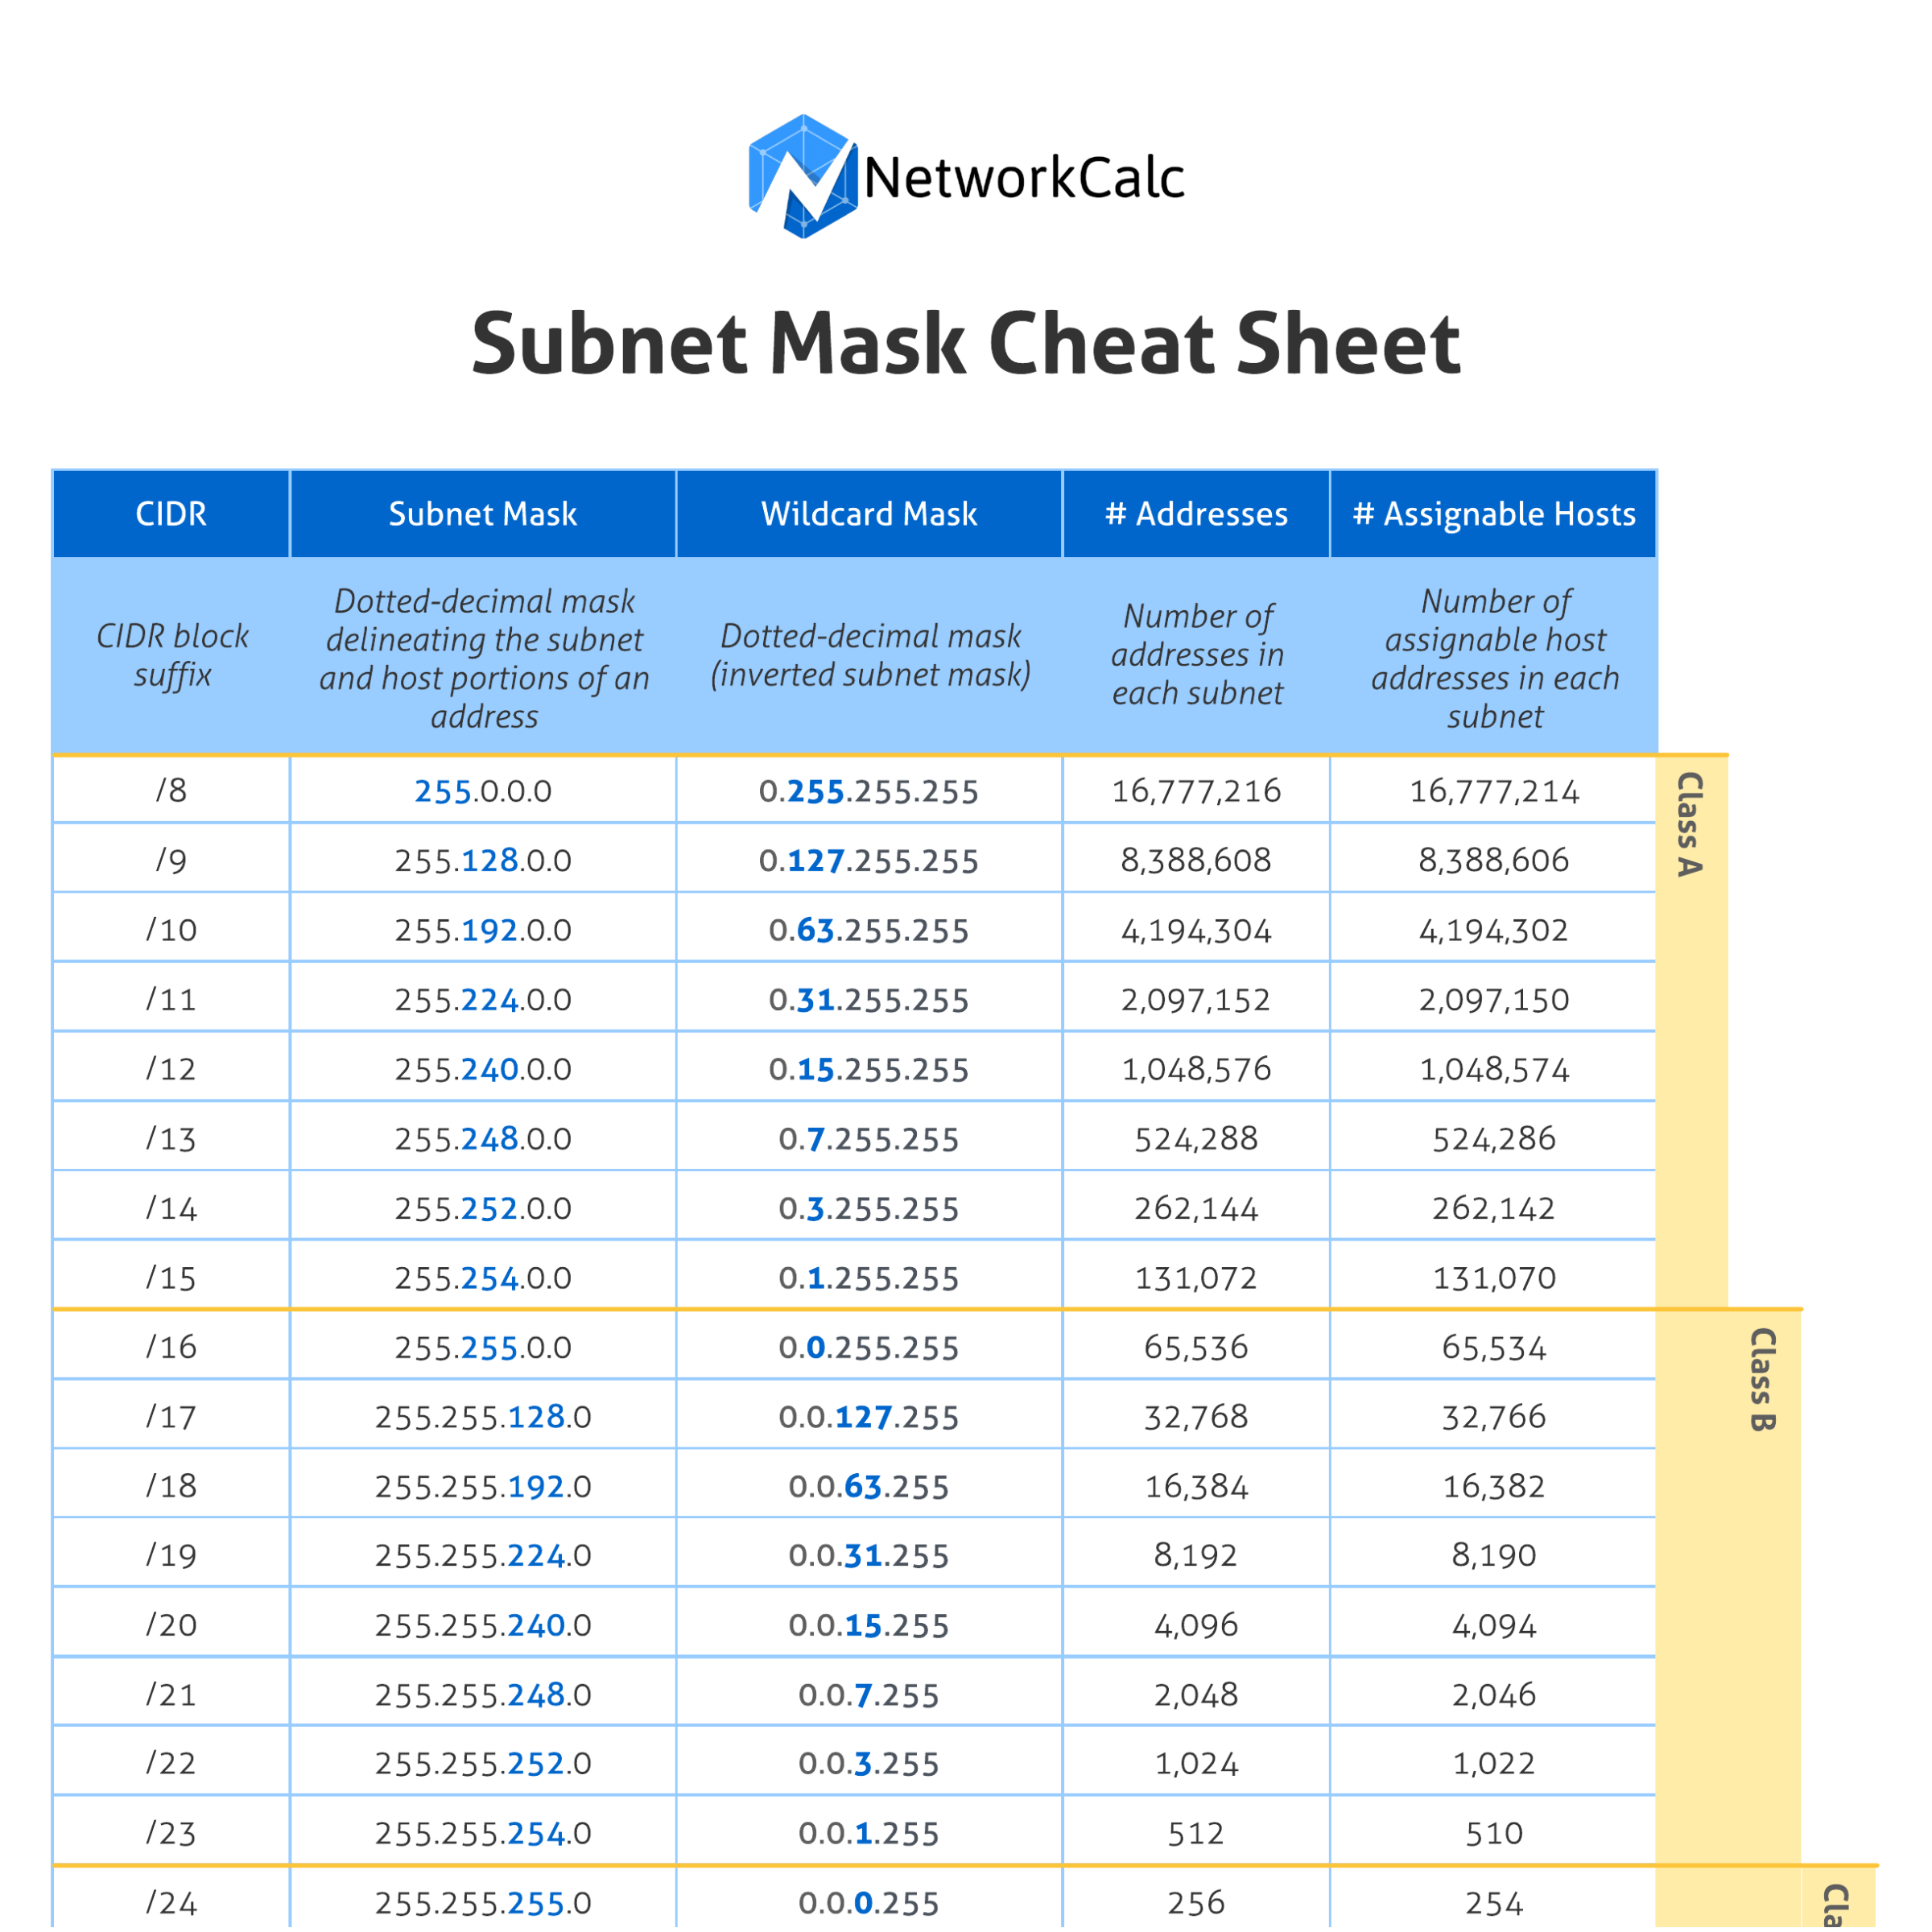 Subnet mask cheat sheet PDF download - an invaluable subnetting reference PDF from NetworkCalc